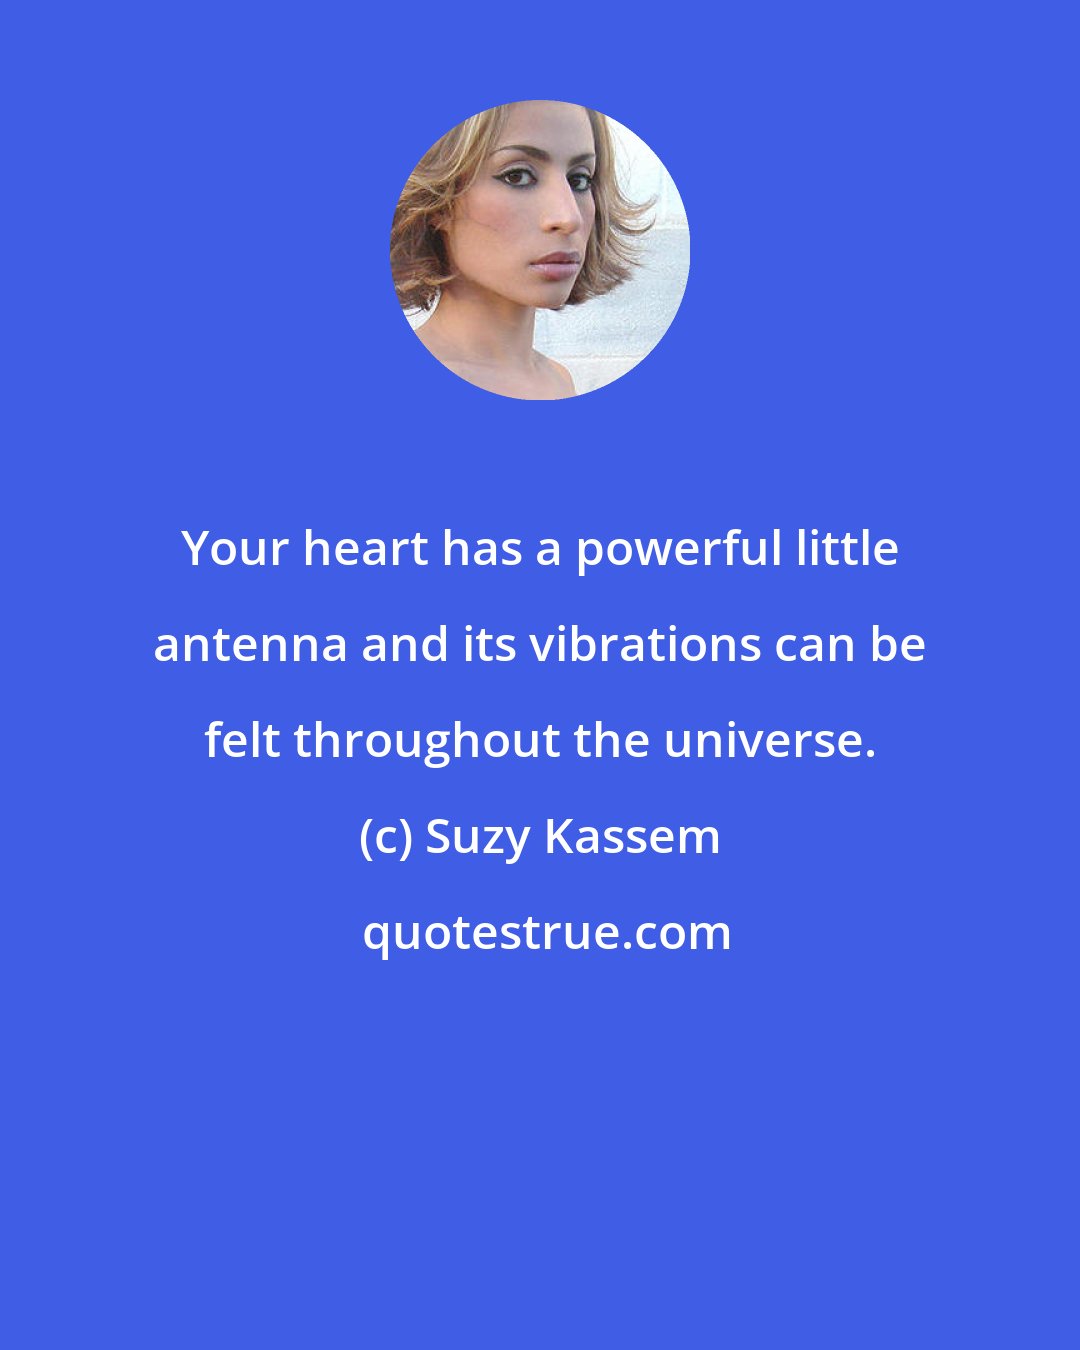 Suzy Kassem: Your heart has a powerful little antenna and its vibrations can be felt throughout the universe.